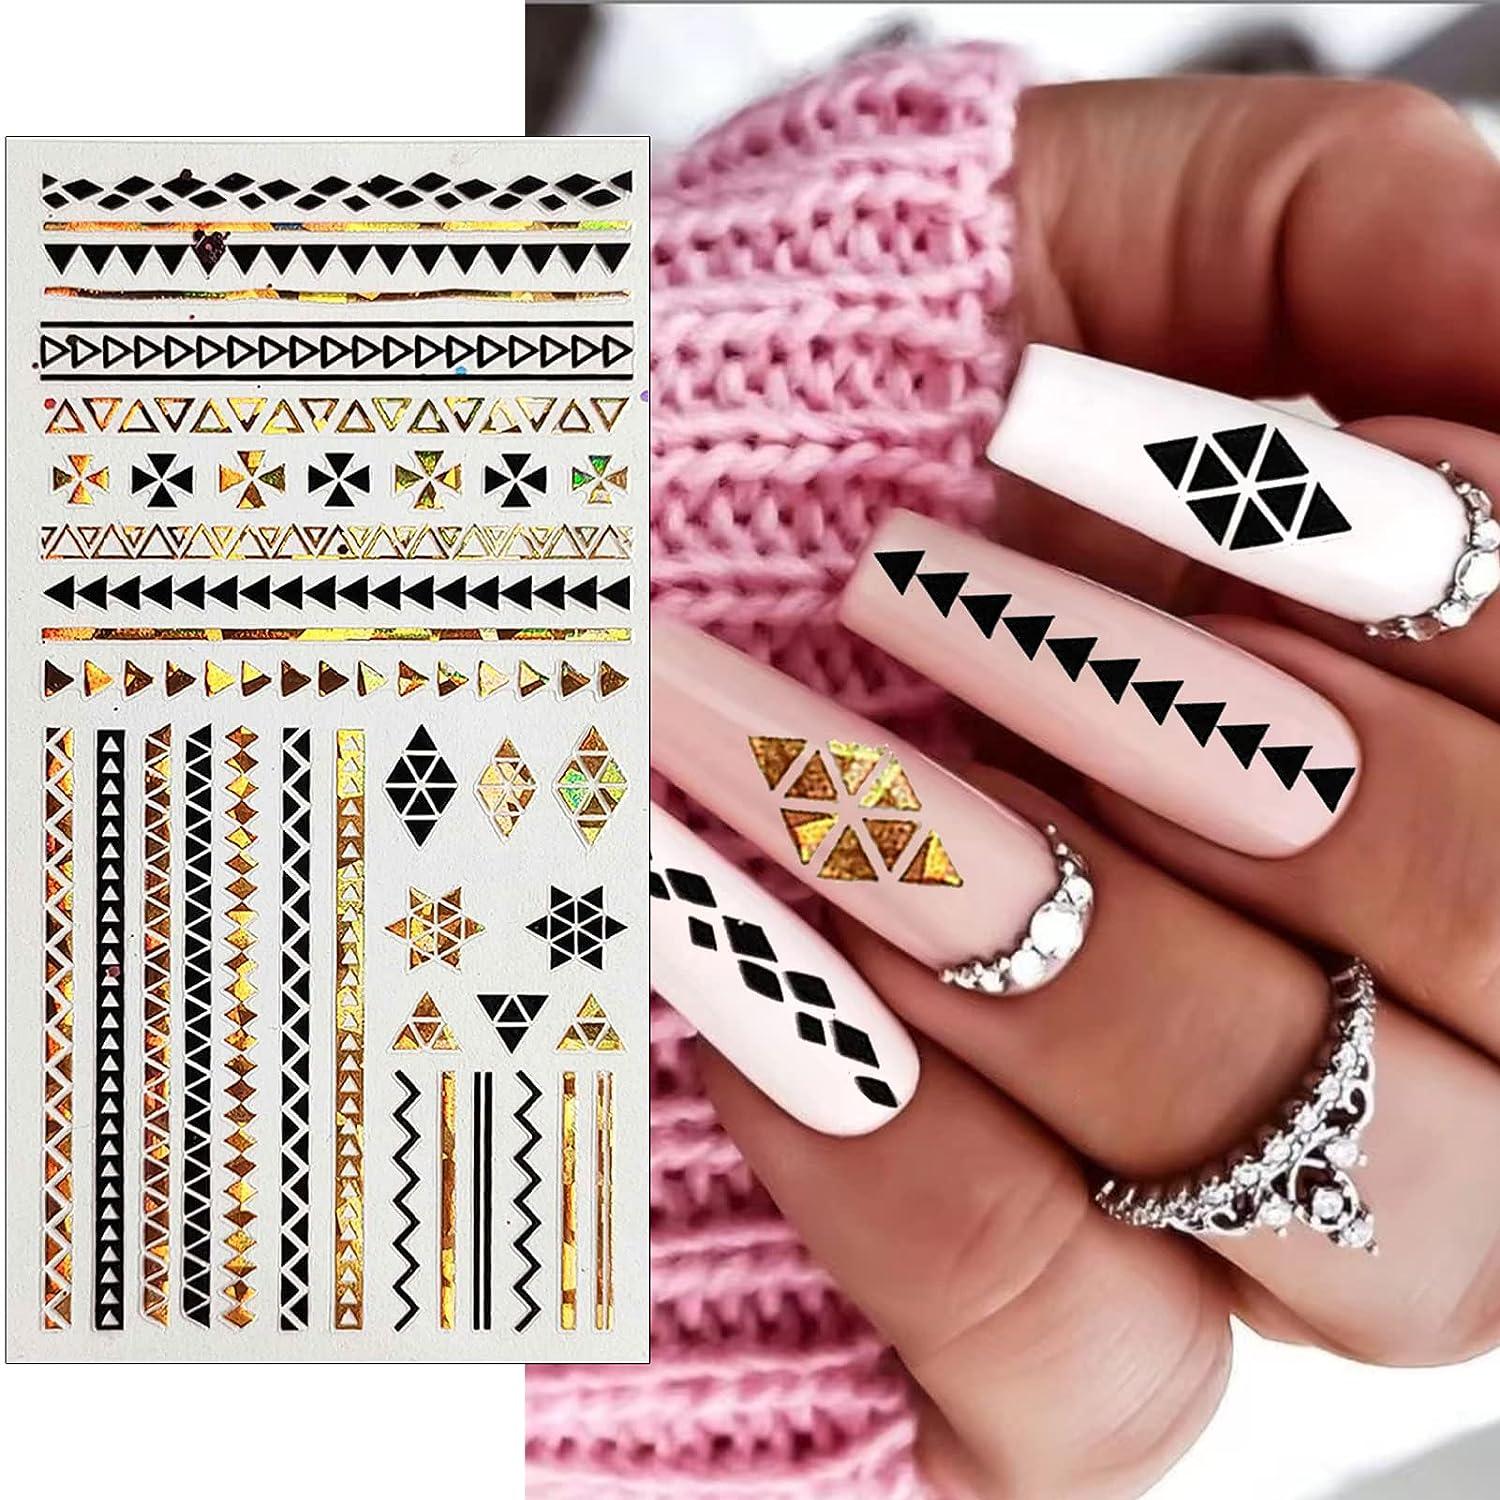 Tribal Nail Art · How To Paint Patterned Nail Art · Beauty on Cut Out + Keep